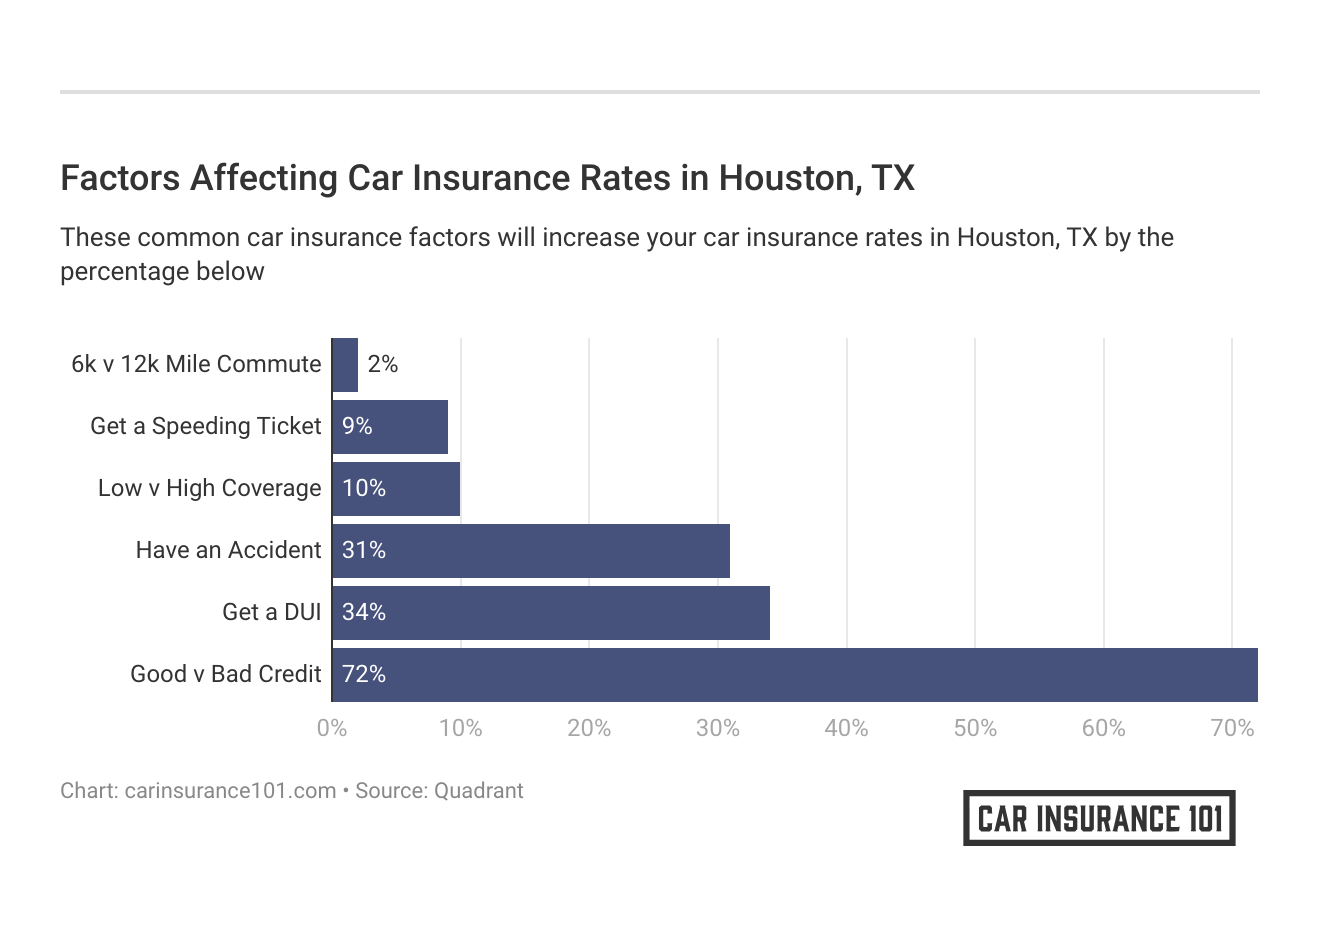 <h3>Factors Affecting Car Insurance Rates in Houston, TX</h3>